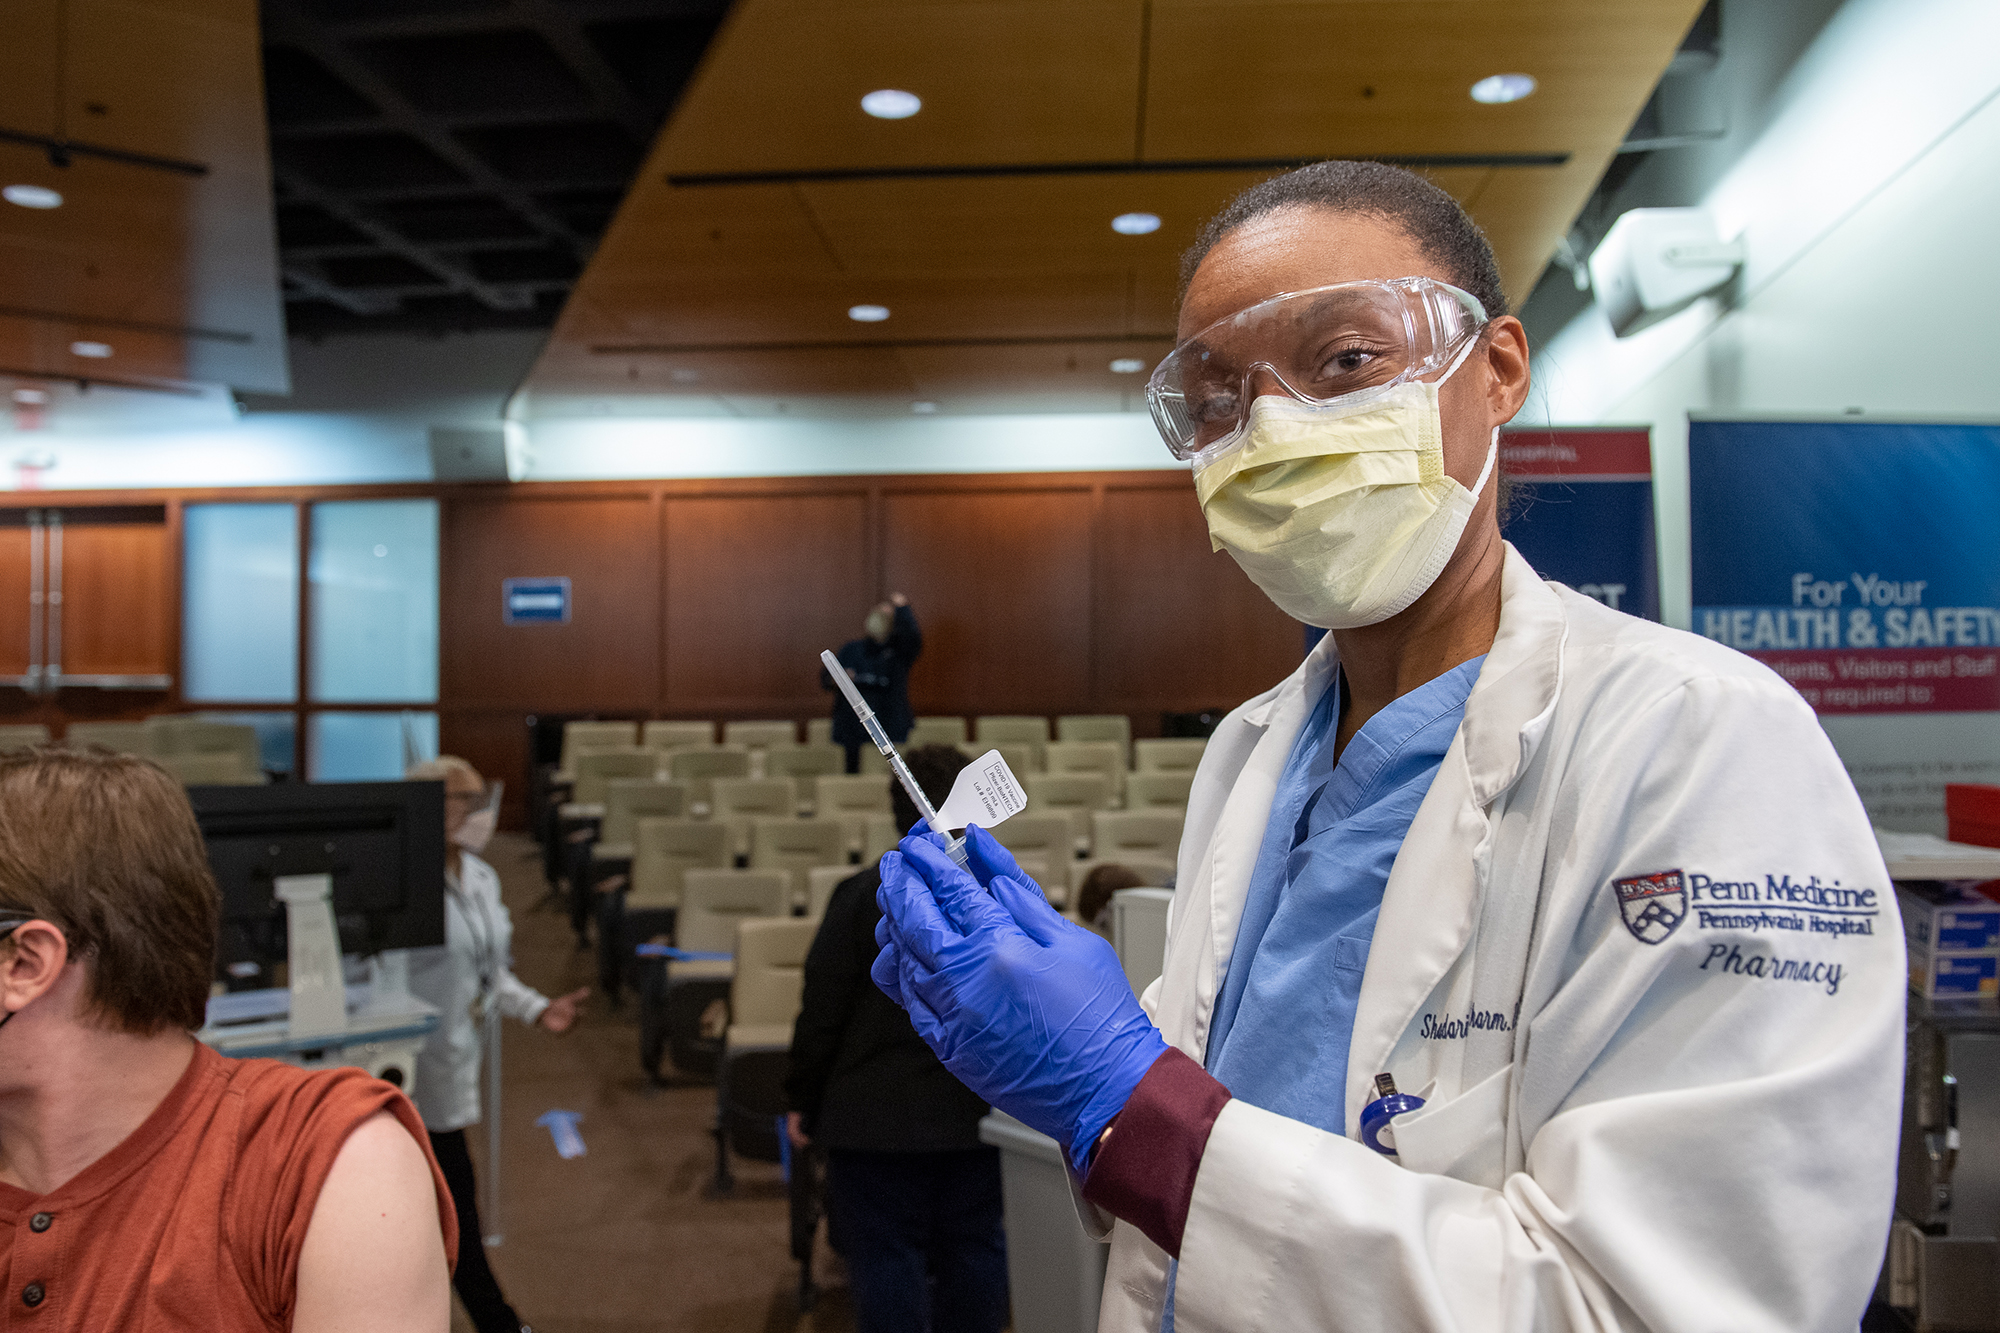 Medical professional with white coat and face PPE holds a syringe of COVID vaccine in a gloved hand, about to be injected in a person seated next to them with sleeve rolled up.